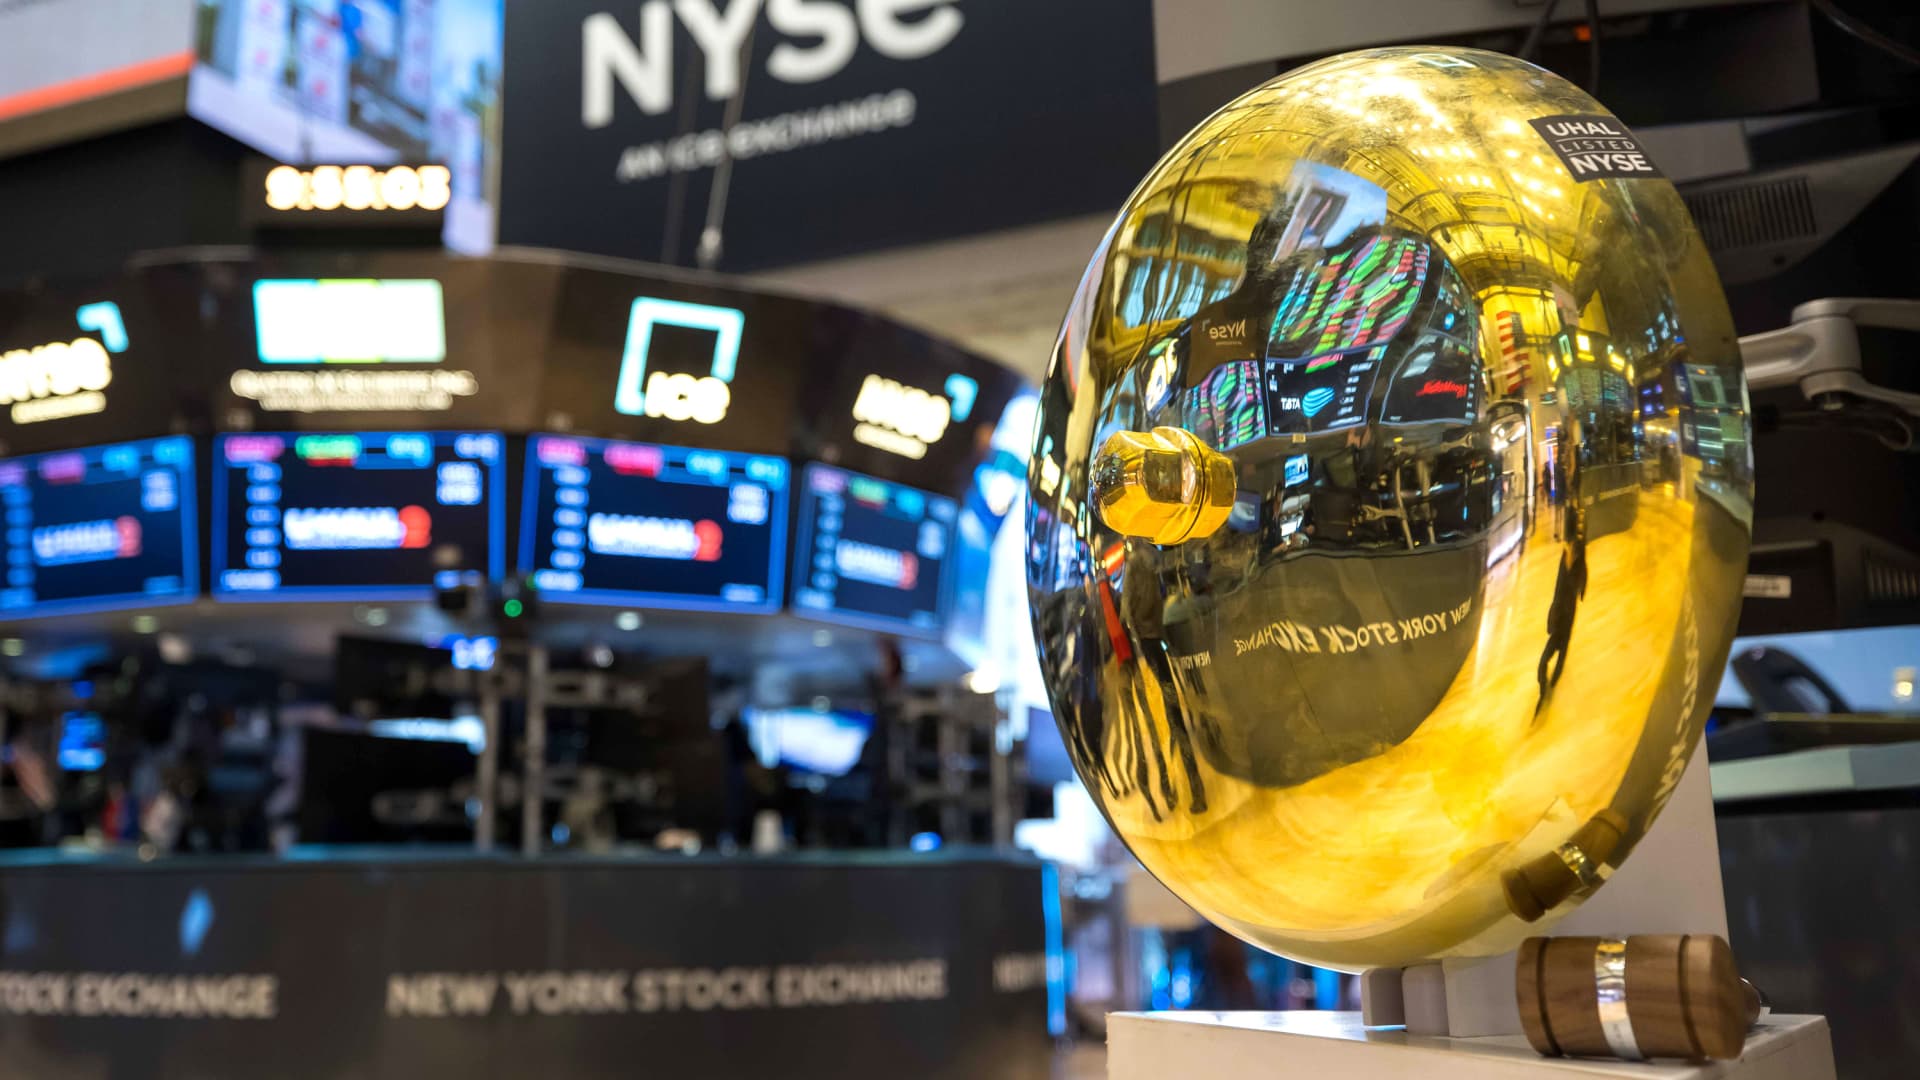 The day after a major trading glitch at the New York Stock Exchange open, the NYSE has issued a statement on what happened: "The root cause was d